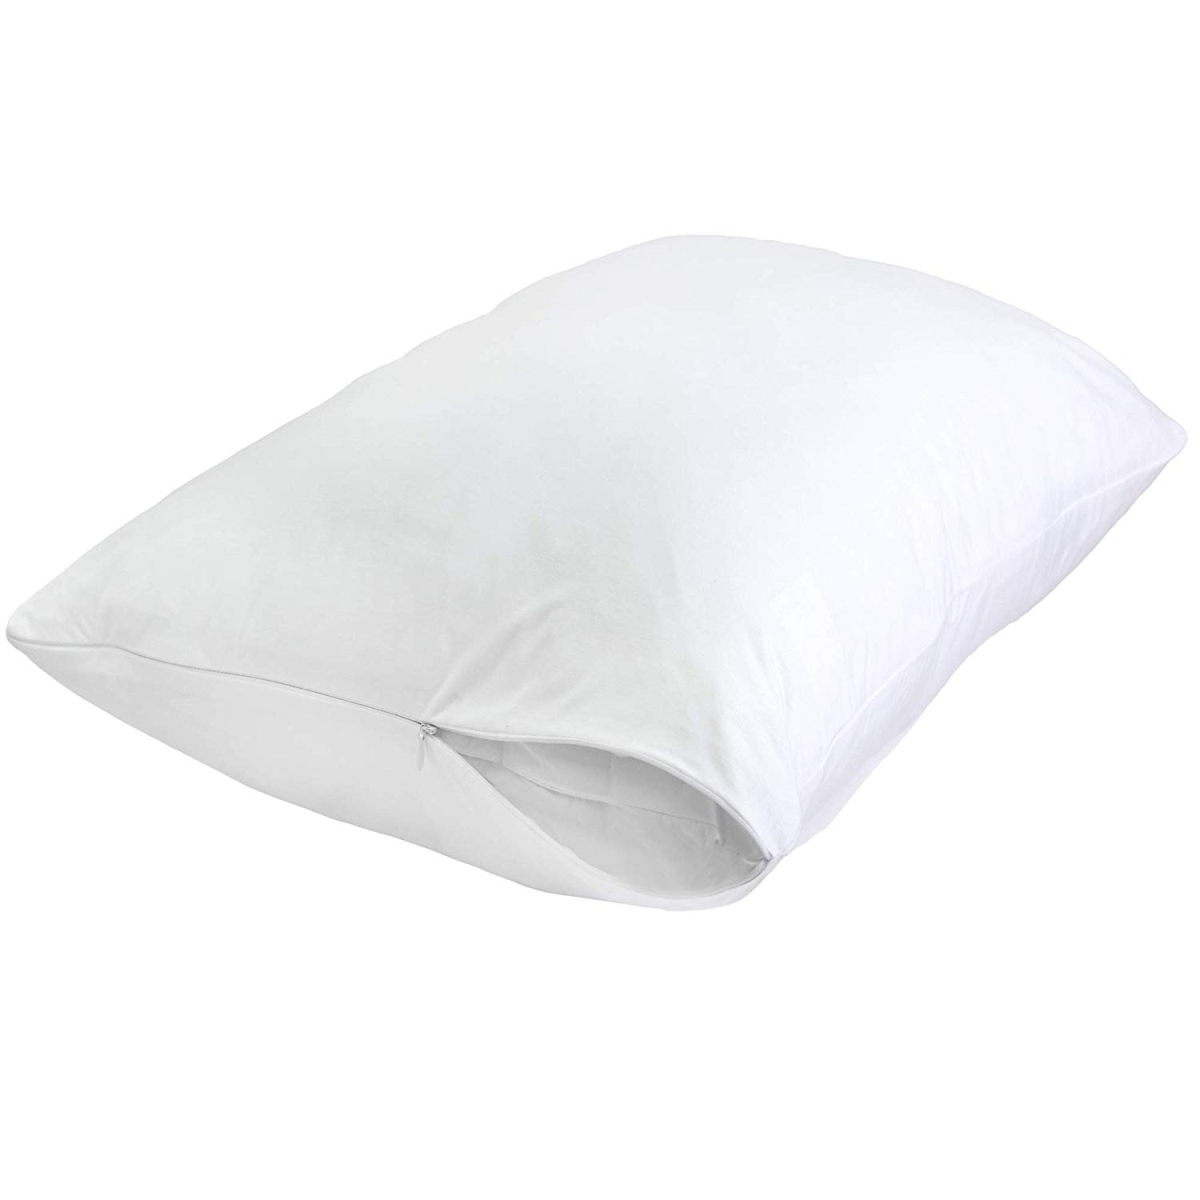 733368 Sleep Solutions By Waterproof Hypoallergenic Bamboo Pillow Protector, White - King Size